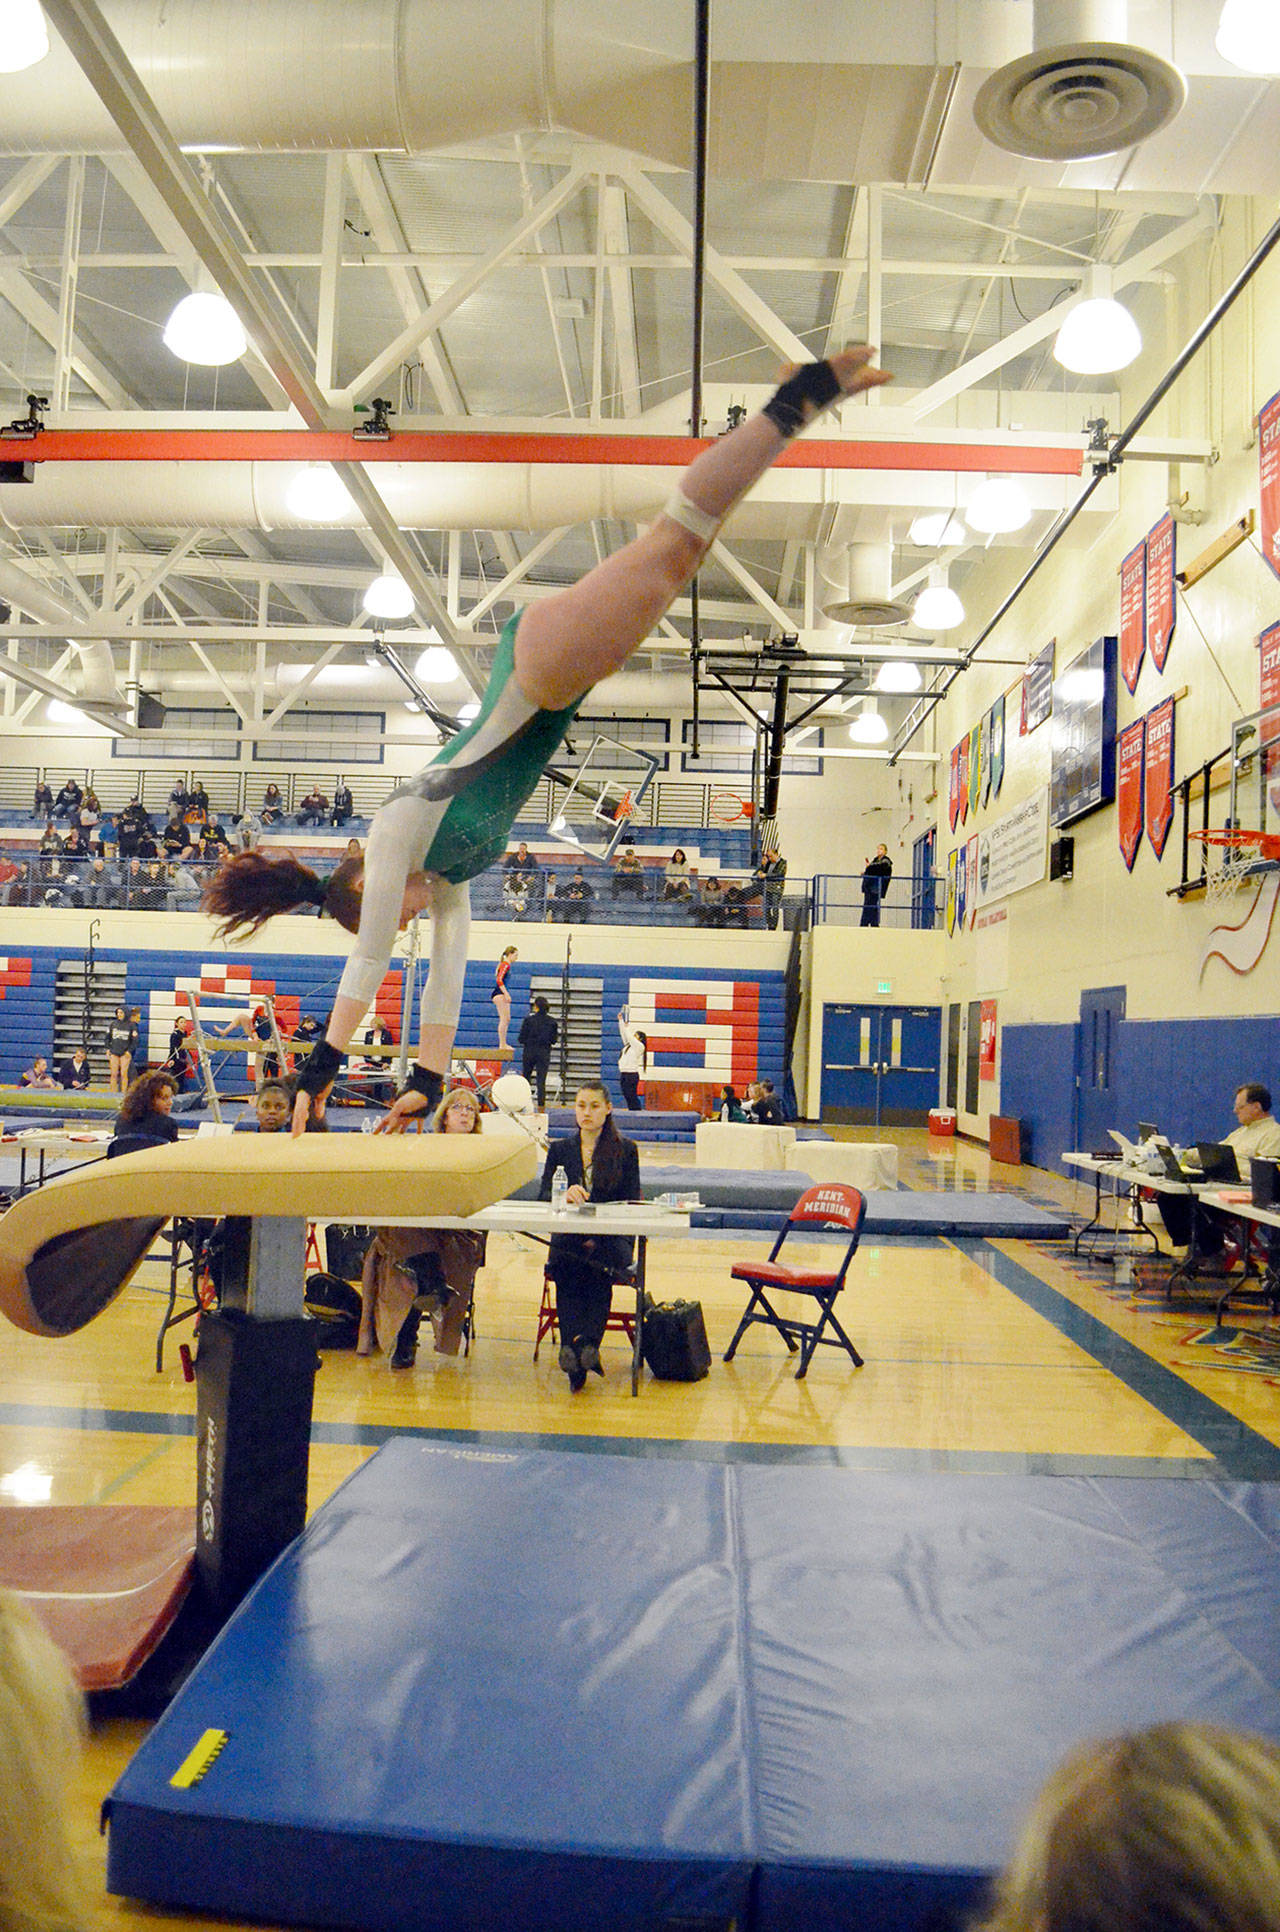 Jackie Mangano                                Port Angeles’ Aiesha LaTourette competes on the vault during the Class 2A/3A West Central District Gymnastics meet at Kent-Meridian High School. LaTourette will compete at the state gymnastics meet at Sammamish High School on Thursday and Friday.